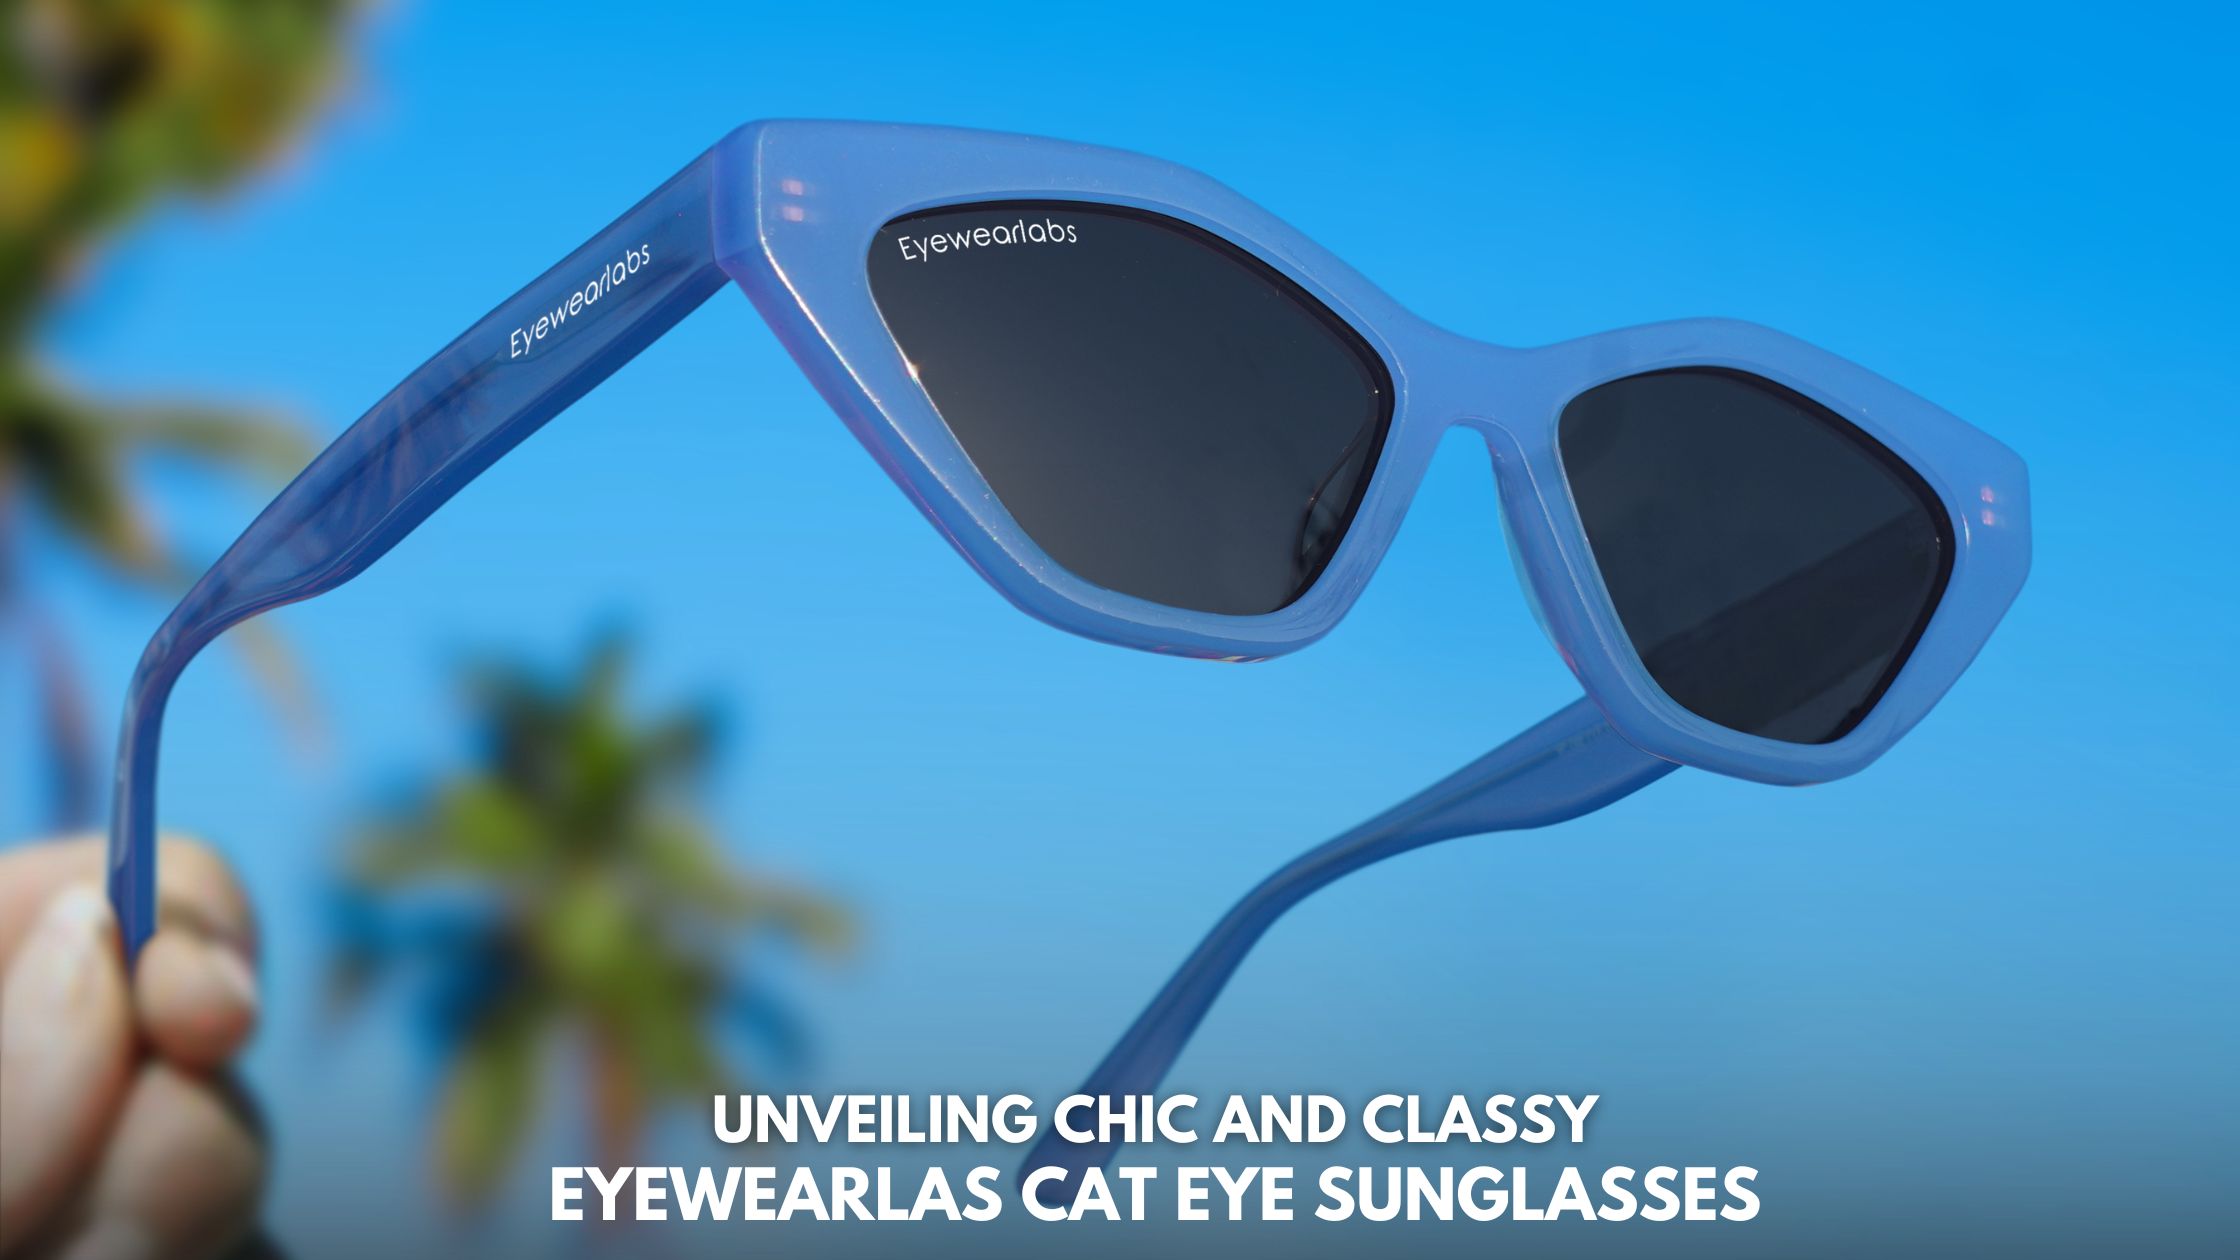 Unveiling the Chic and Classy: Eyewearlabs Cat Eye Sunglasses